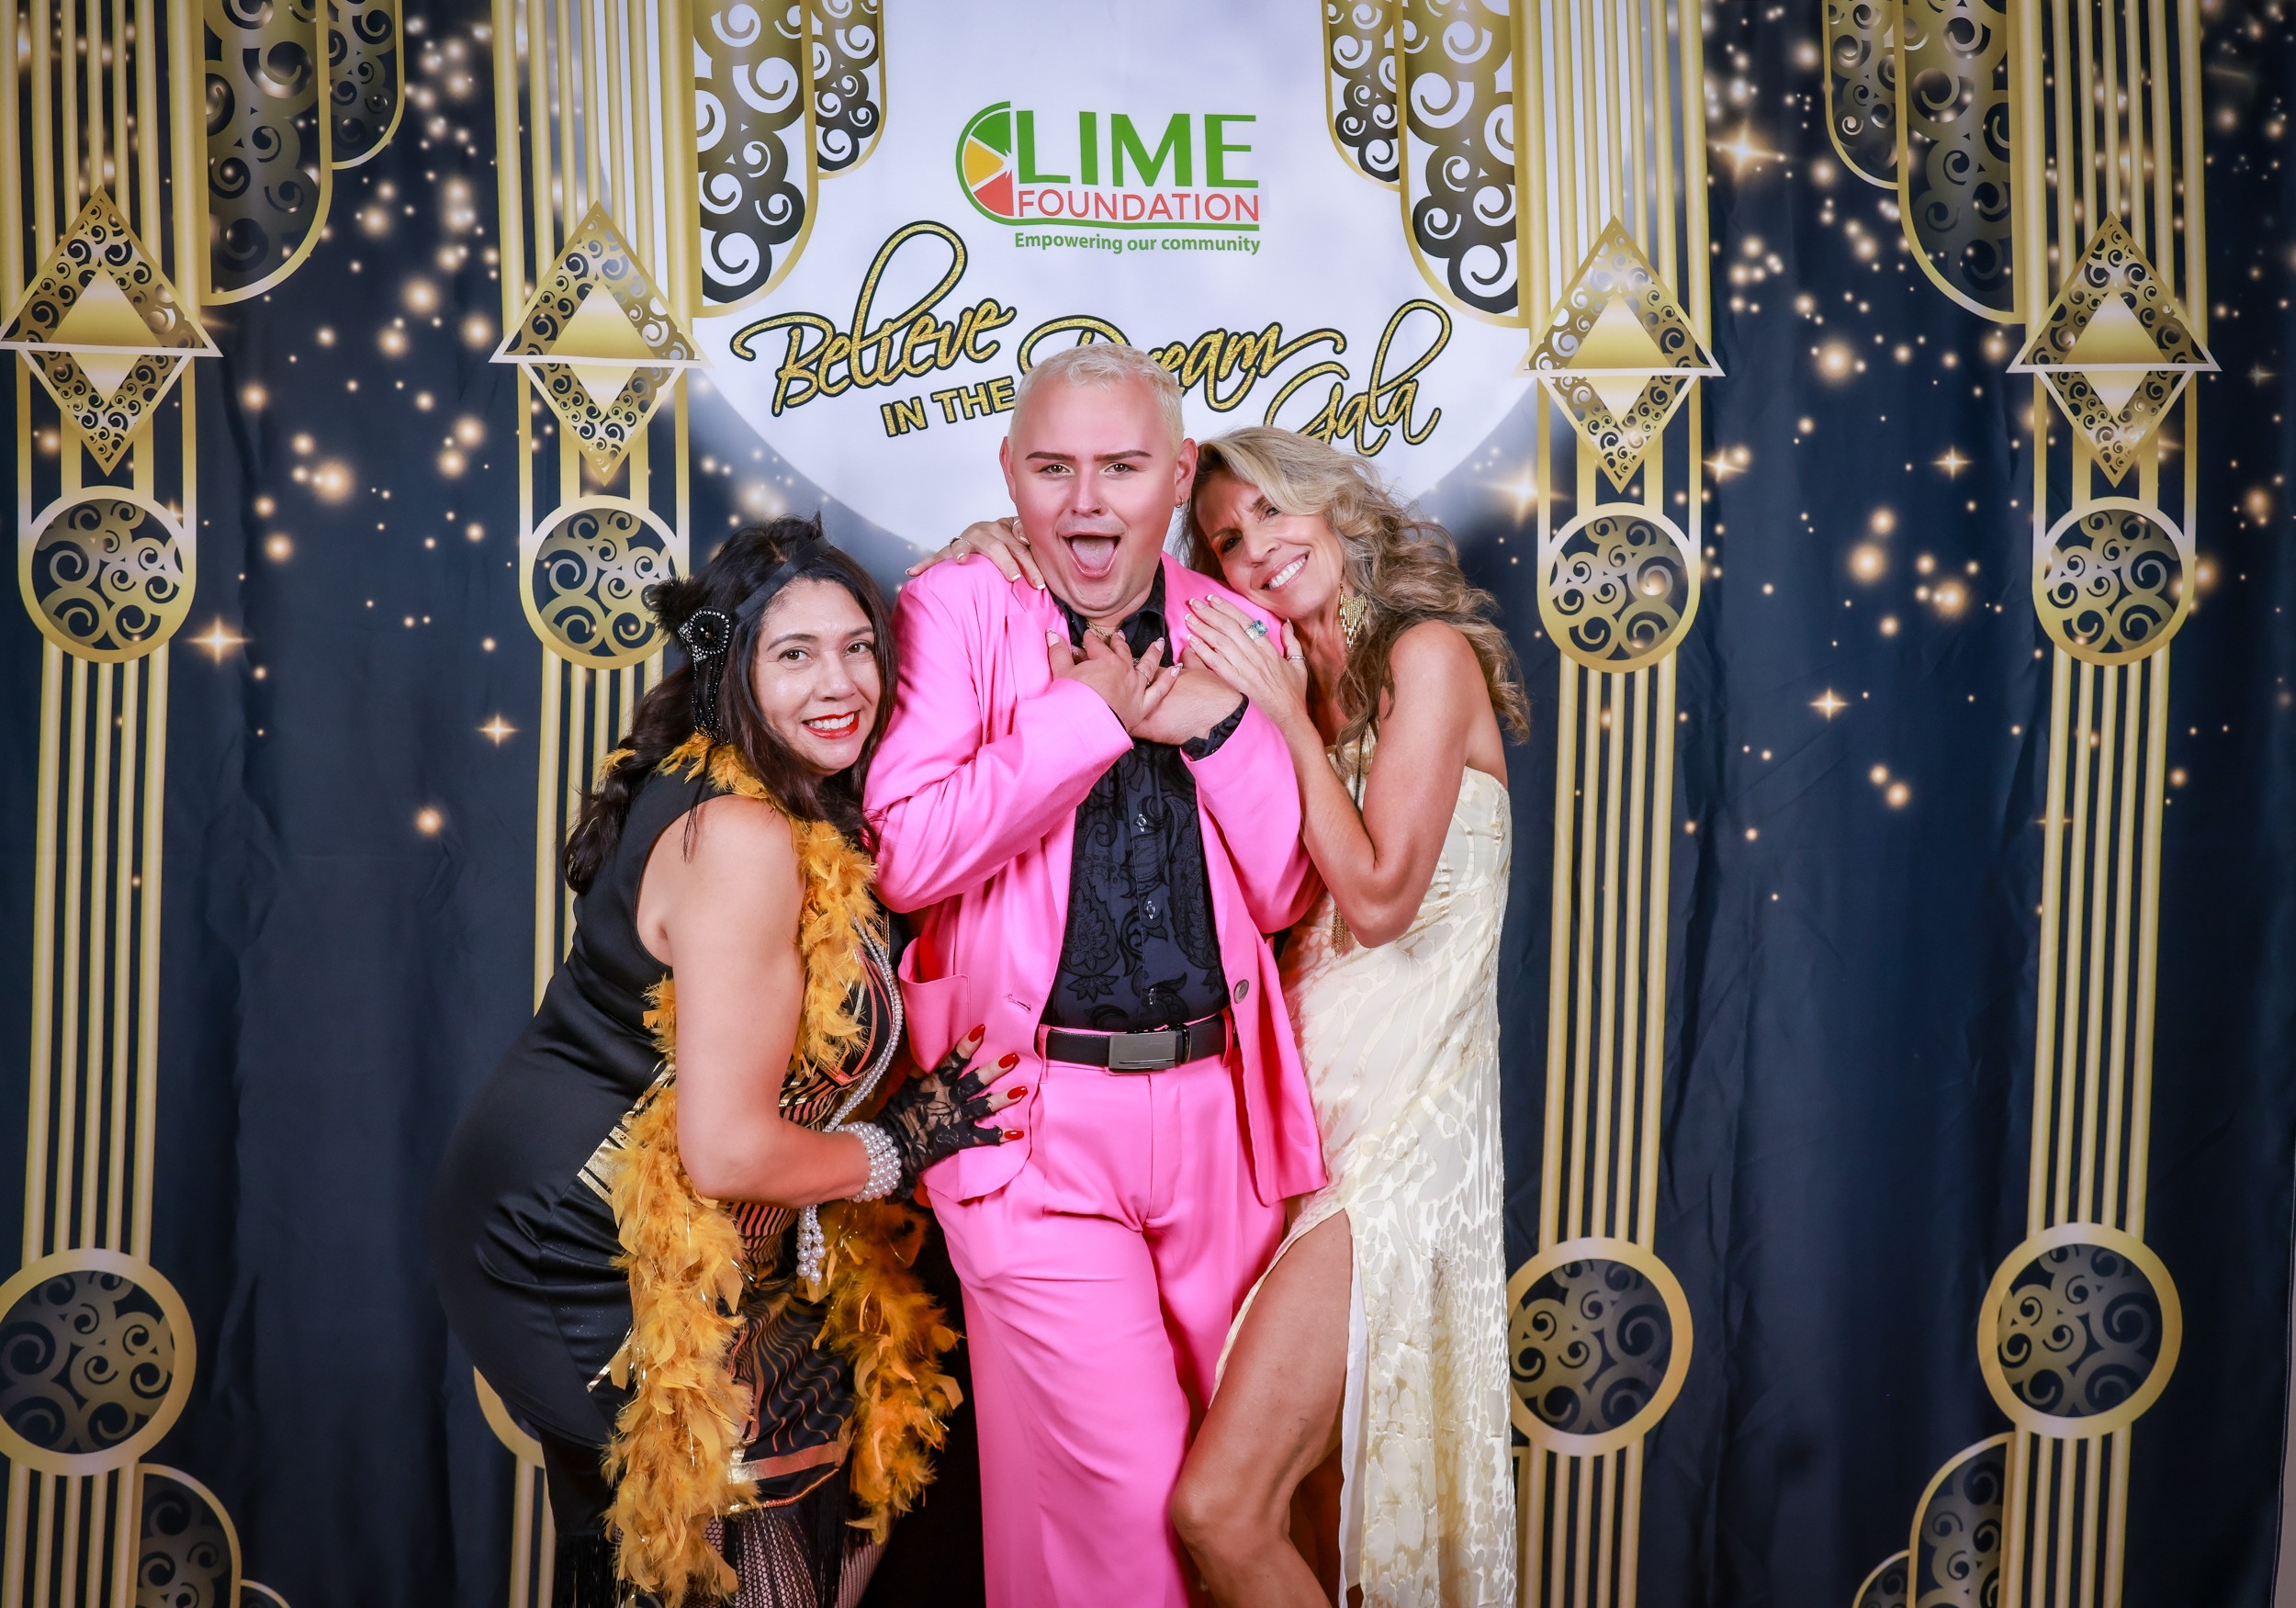 A man in a pink suit and a woman in a pink dress posing for a photo at The LIME Foundation of Santa Rosa, a Sonoma County Non-Profit Organization.